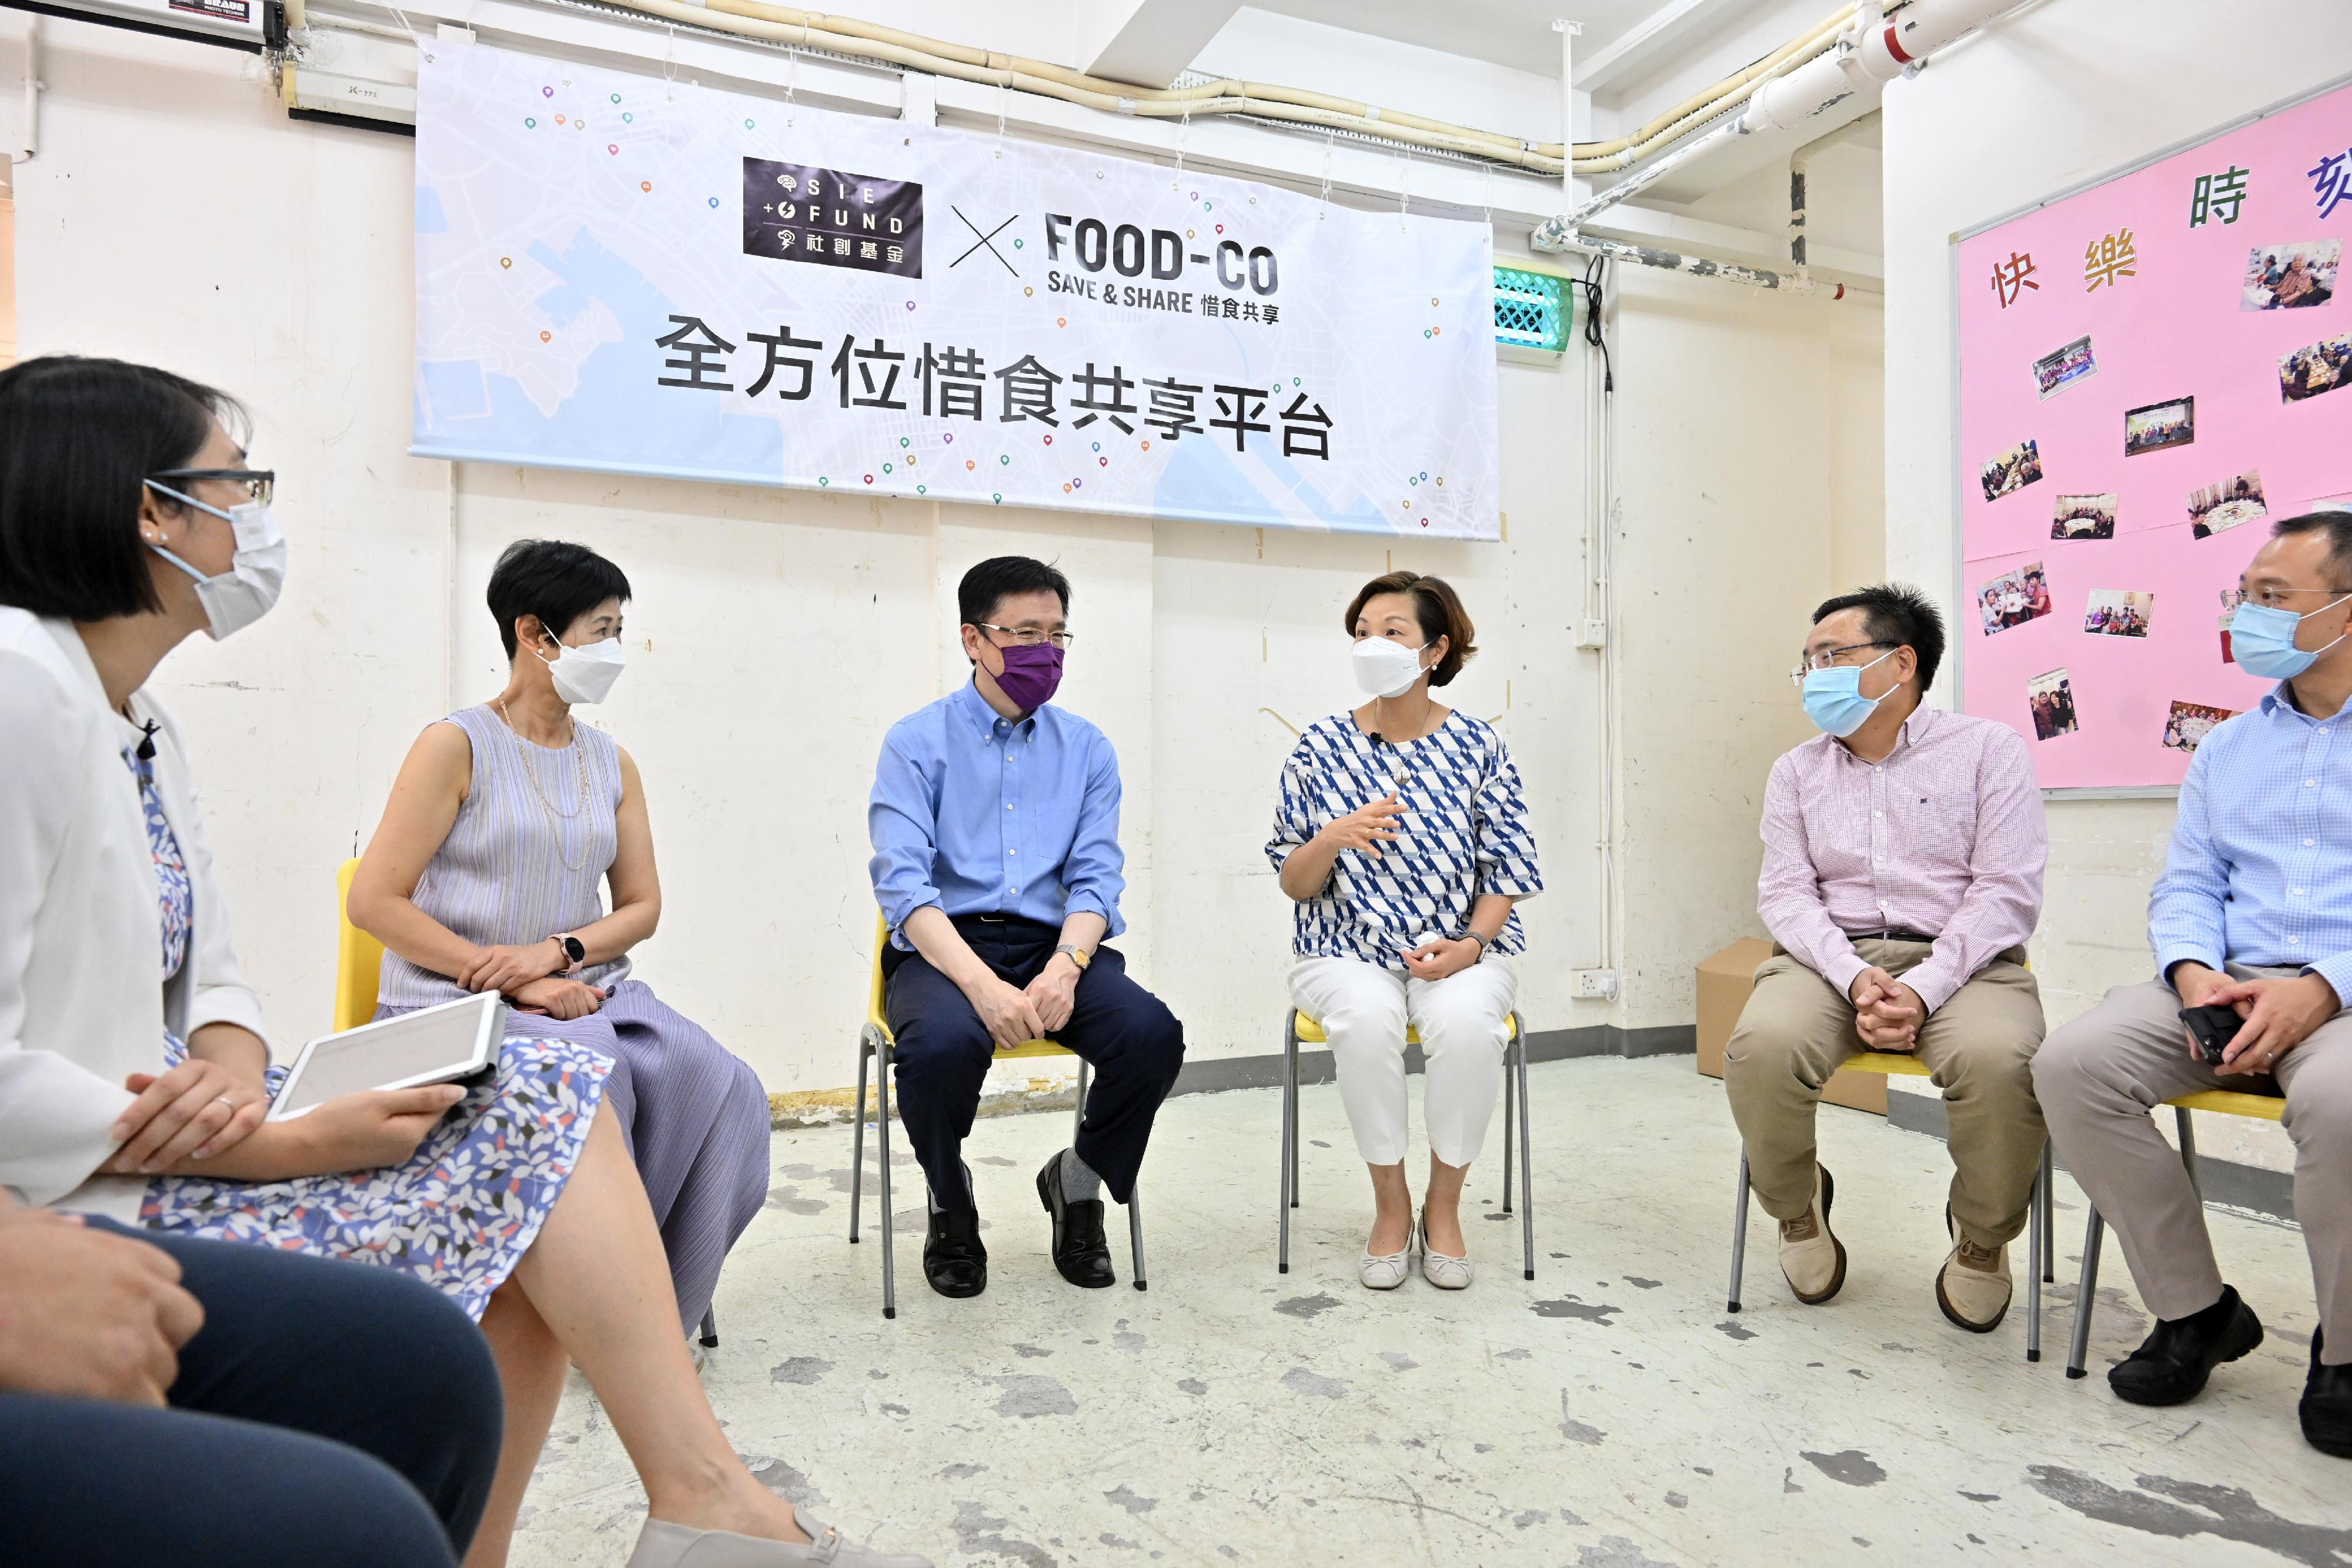 The Secretary for Innovation, Technology and Industry, Professor Sun Dong, today (September 9) visits the Kindness Centre of St James' Settlement, an intermediary of the food support flagship project FOOD-CO launched under the Social Innovation and Entrepreneurship Development Fund (SIE Fund). Photo shows Professor Sun (third left) receiving a briefing from the Chief Executive Officer of St James' Settlement, Ms Josephine Lee (third right), on the latest operation of the food support programme. Looking on are the Commissioner for Efficiency, Mr Ivan Lee (second right); the Chairperson of the SIE Fund Task Force, Dr Jane Lee (second left); and the Vice-chairperson of the SIE Fund Task Force, Mr Alvin Miu (first right).